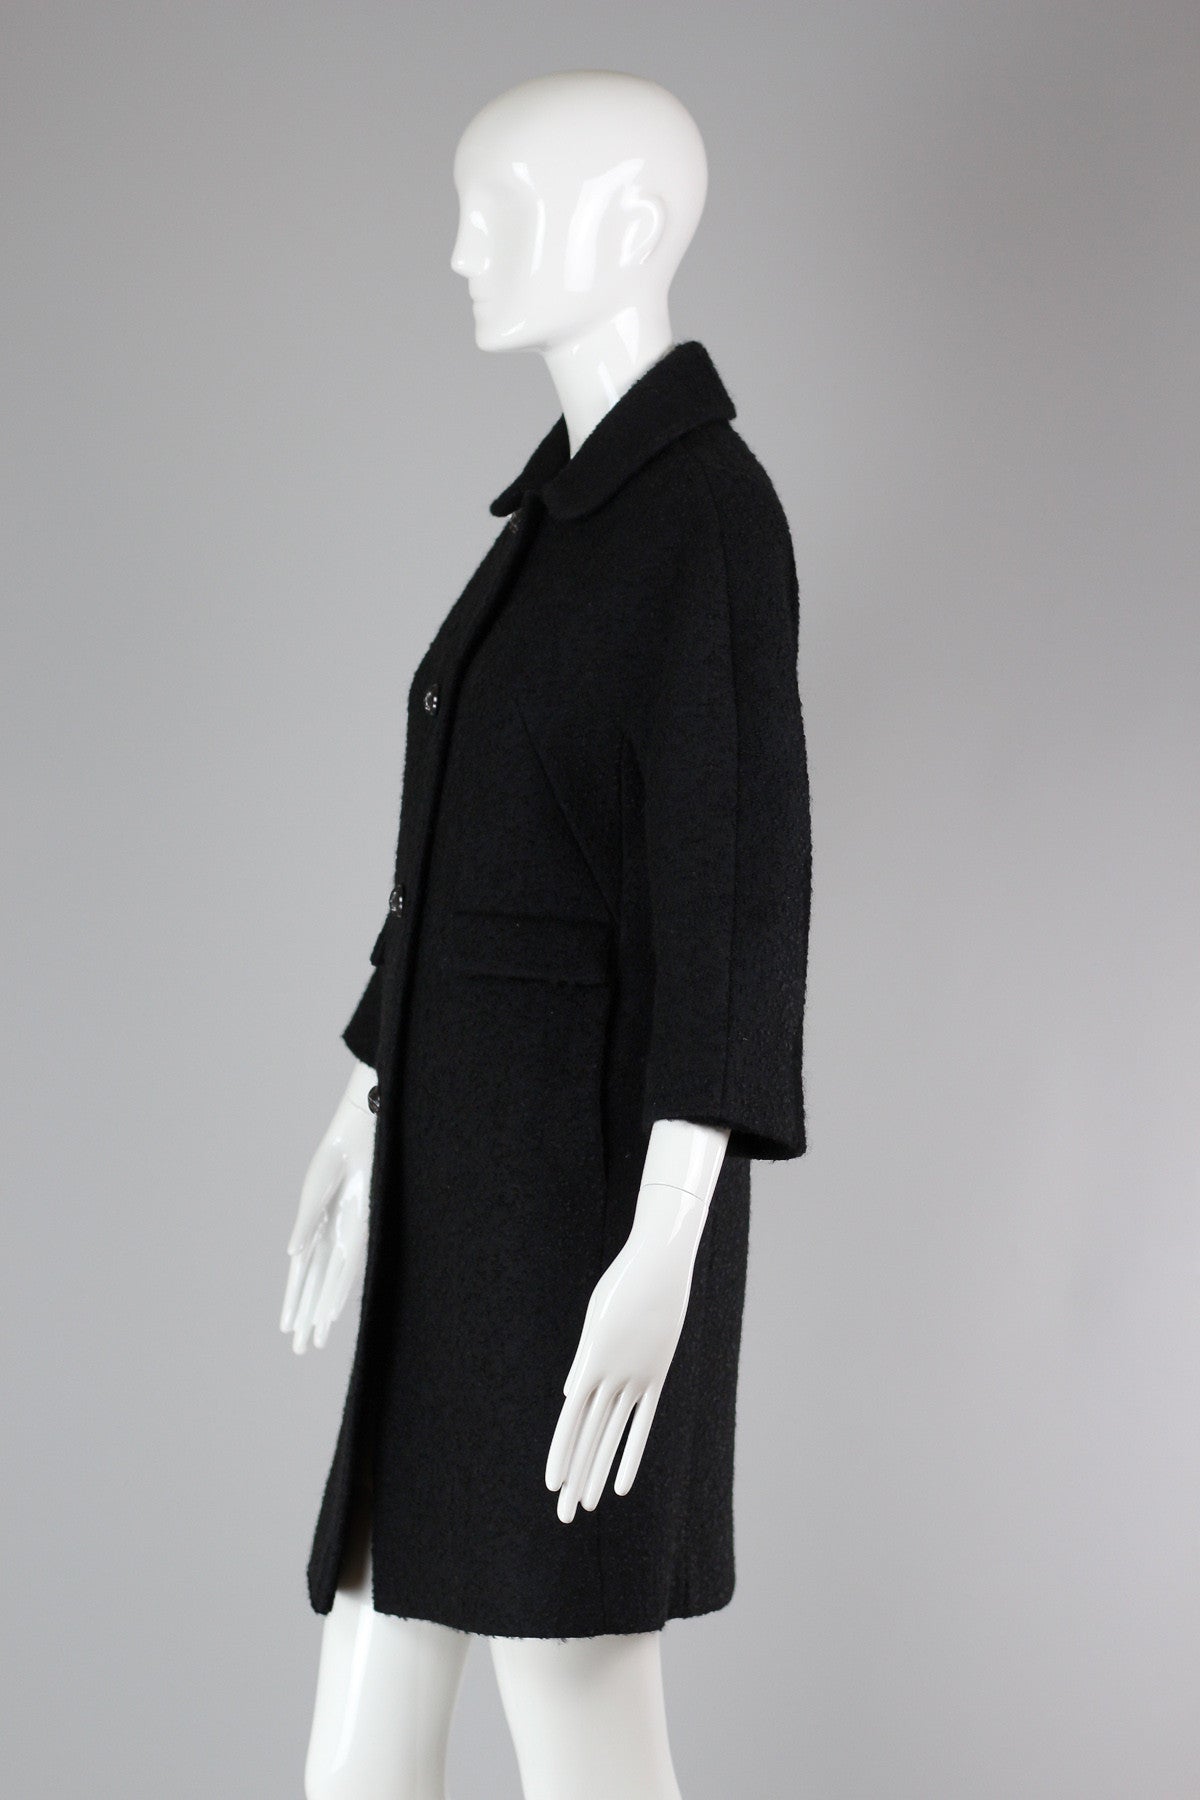 Vintage 1950s-60s Black Boucle Car Coat with 3/4 Sleeves